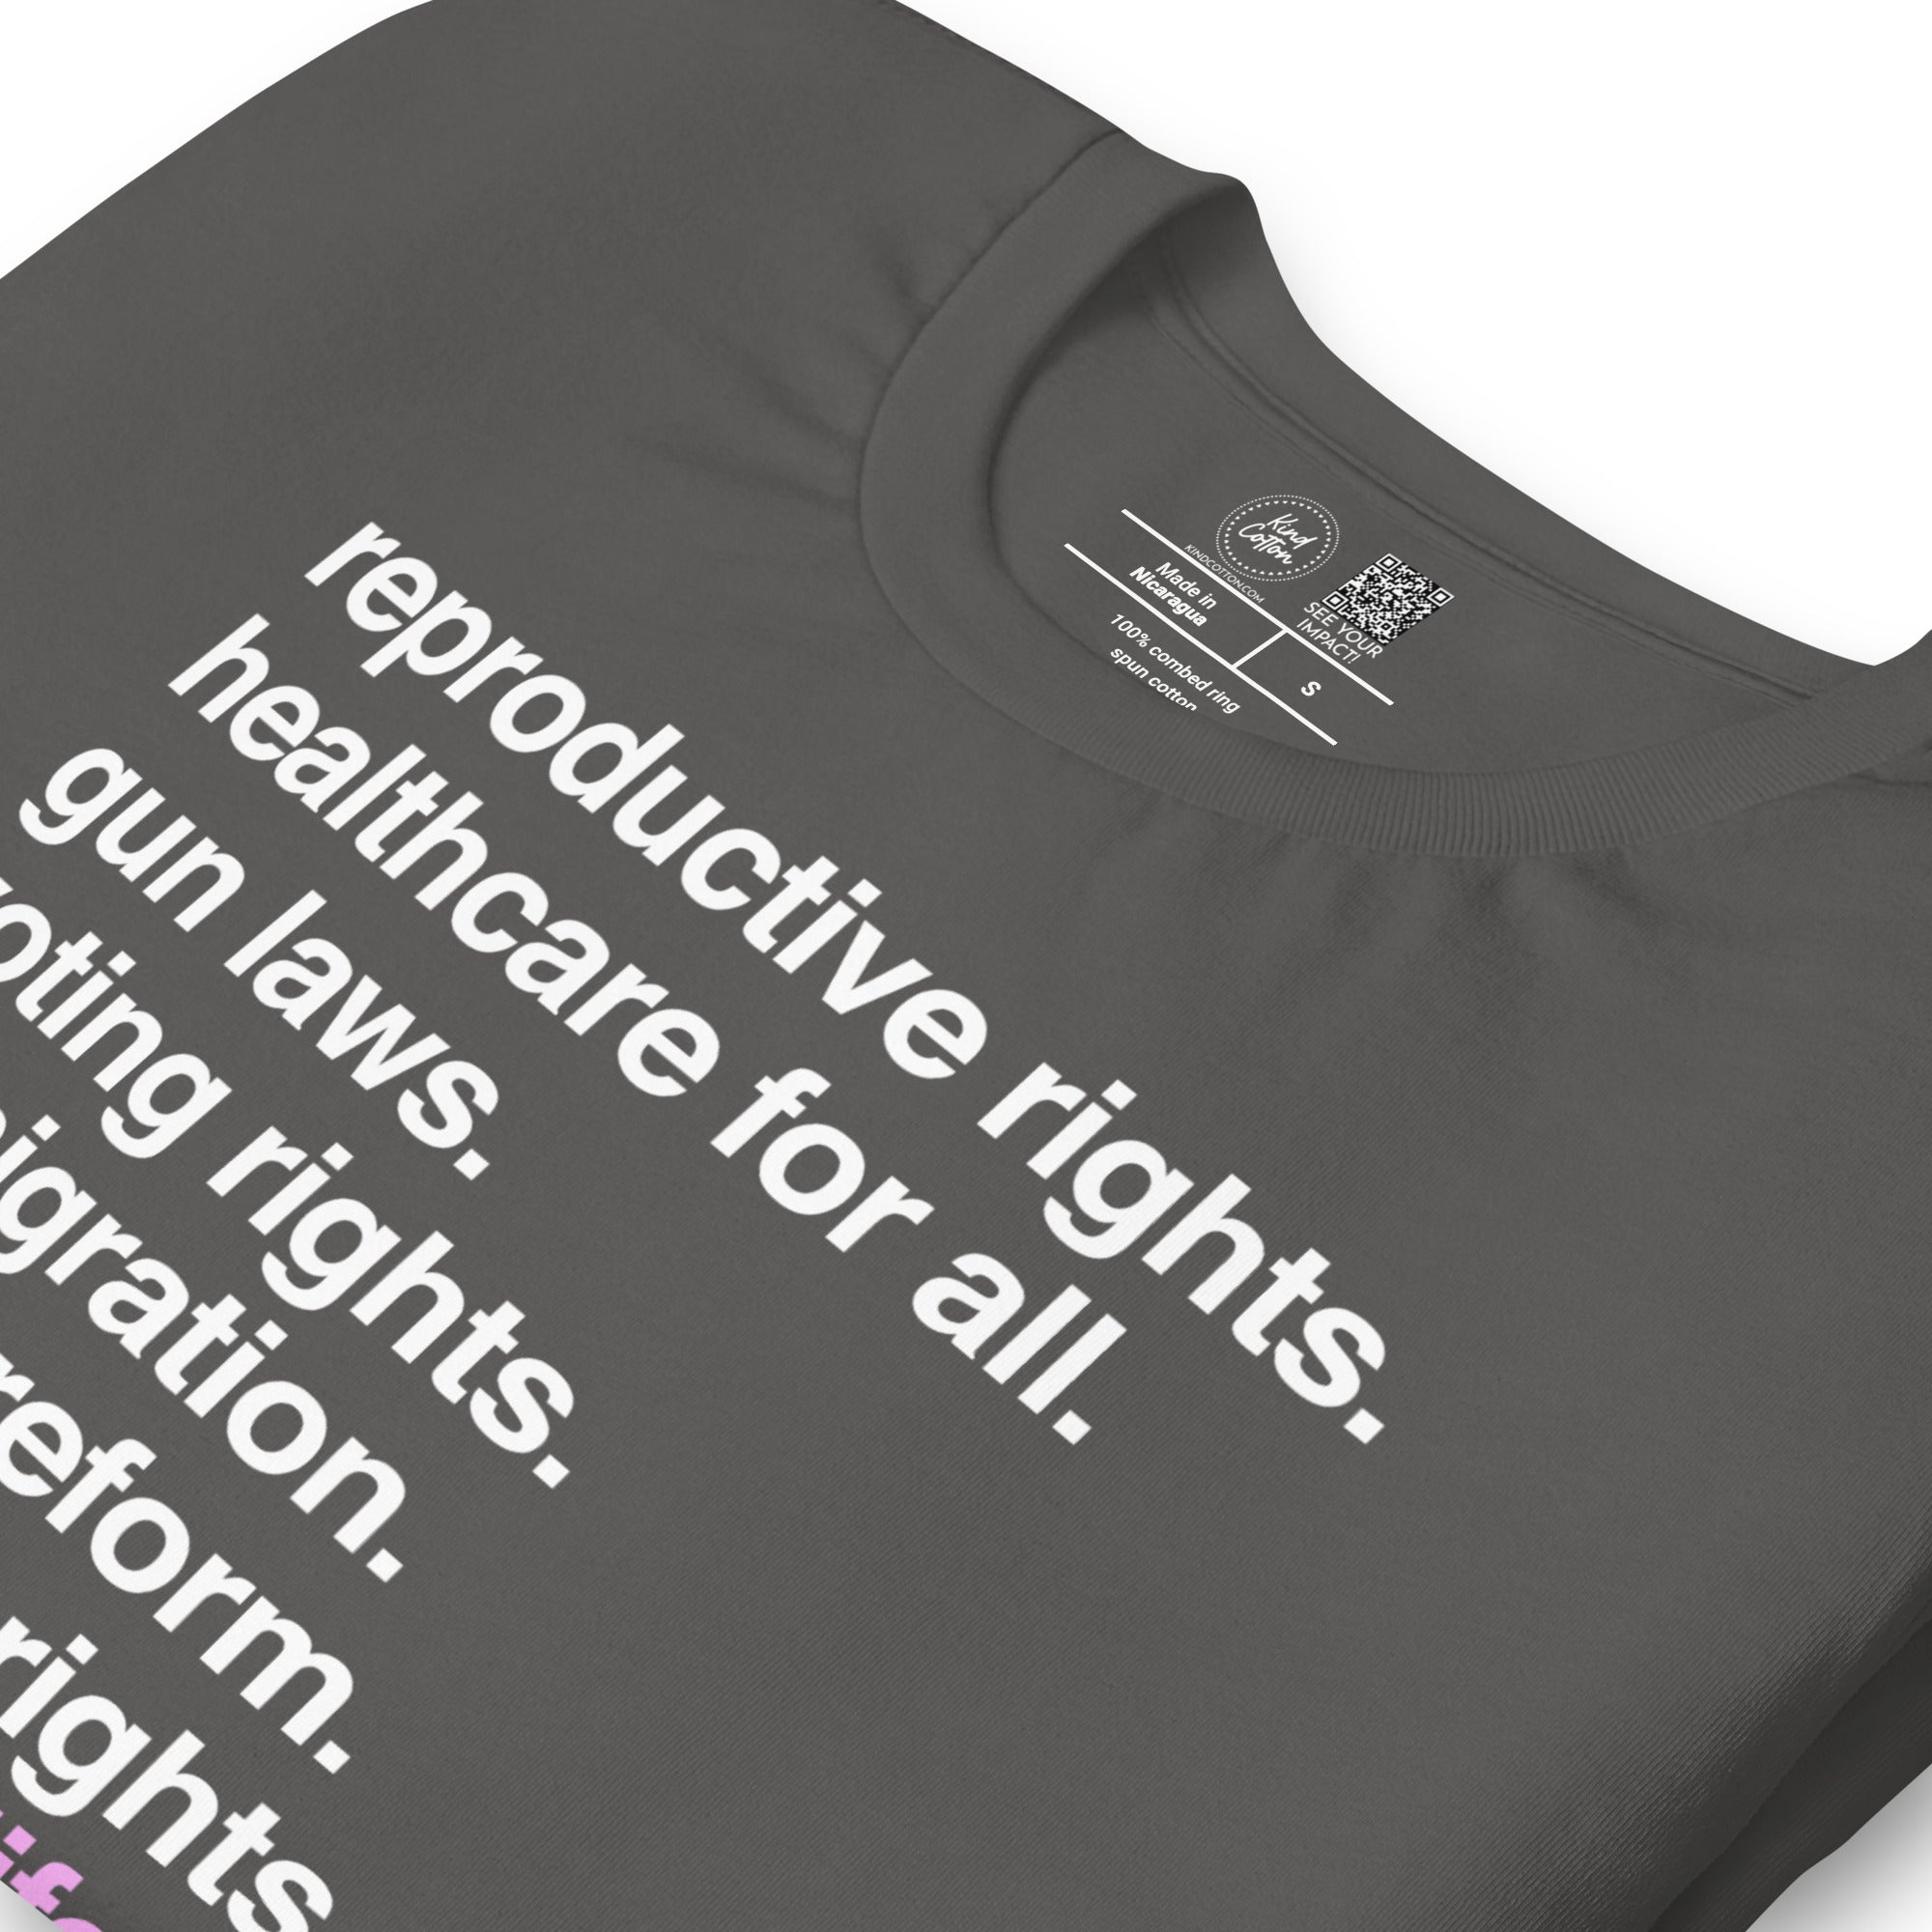 Reproductive Rights Classic Tee